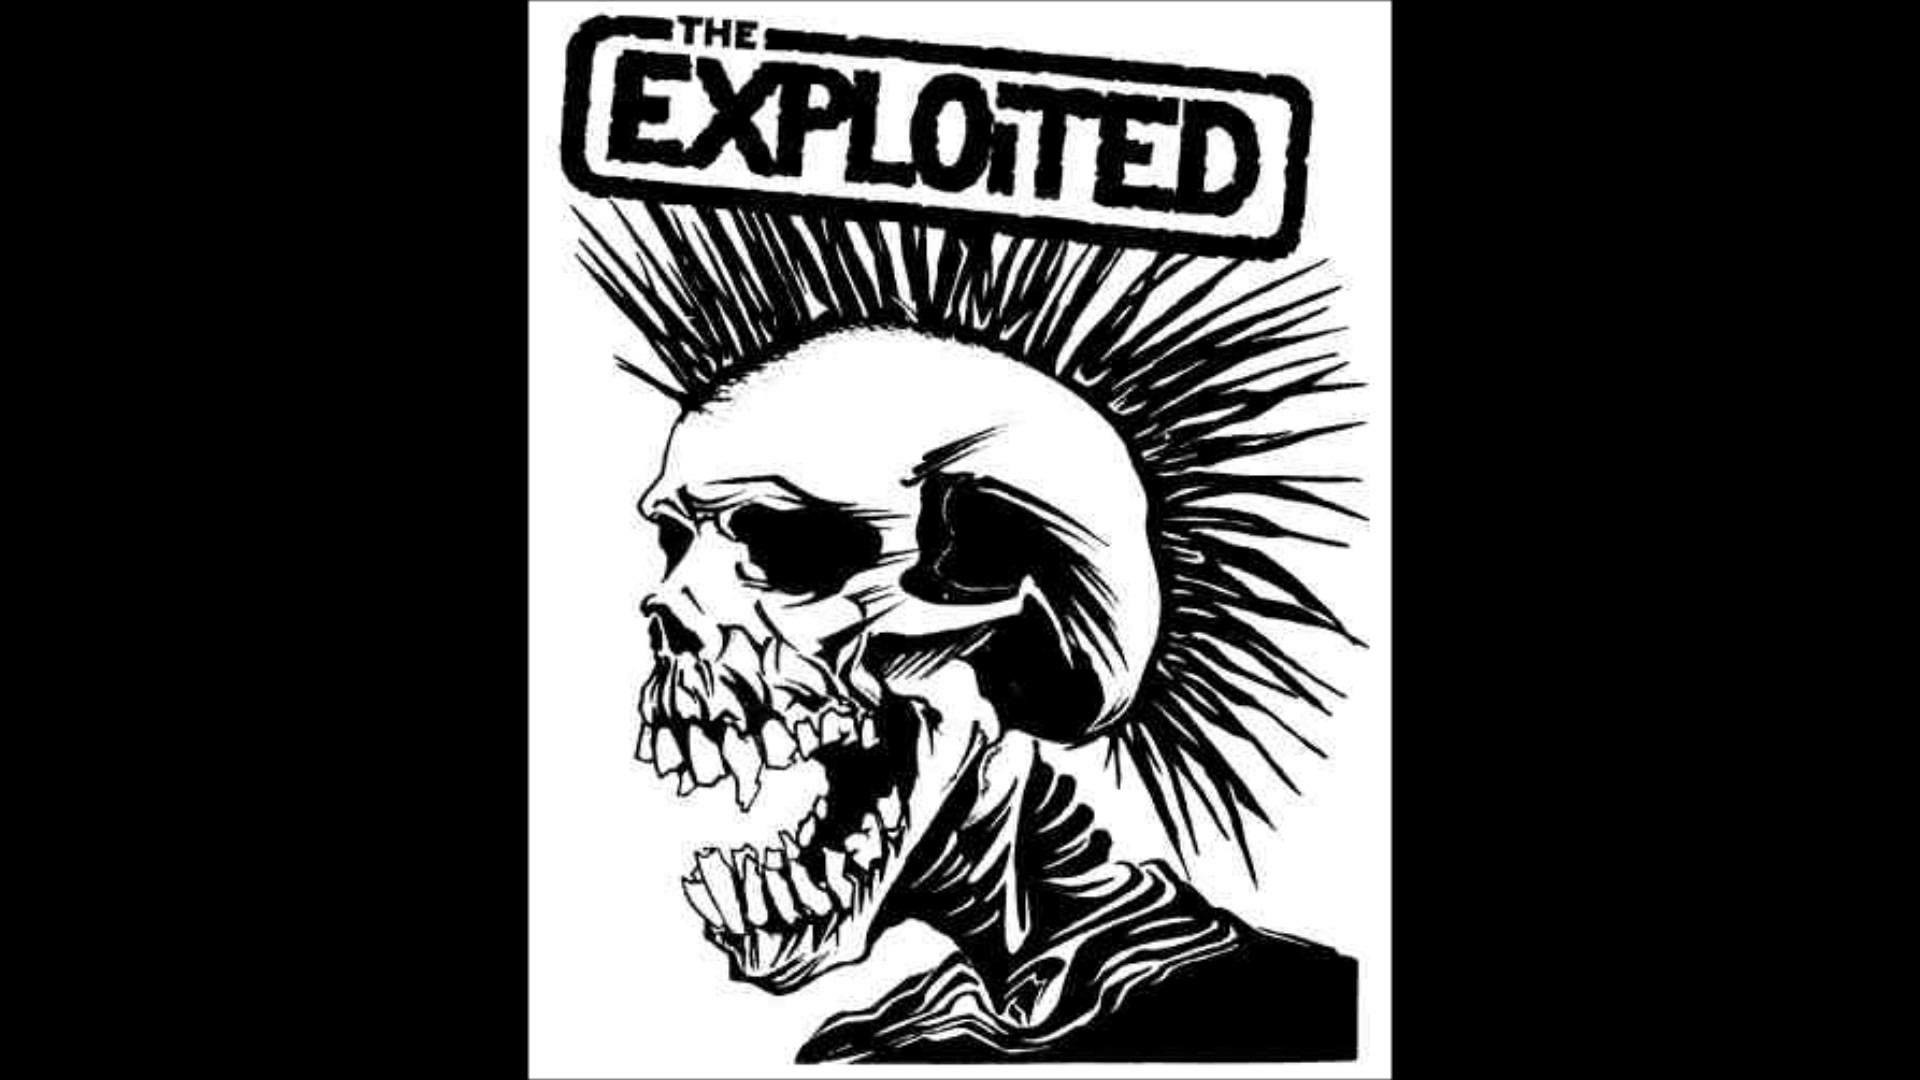 1920x1080  The Exploited Army Life Old School UK Punk Rock